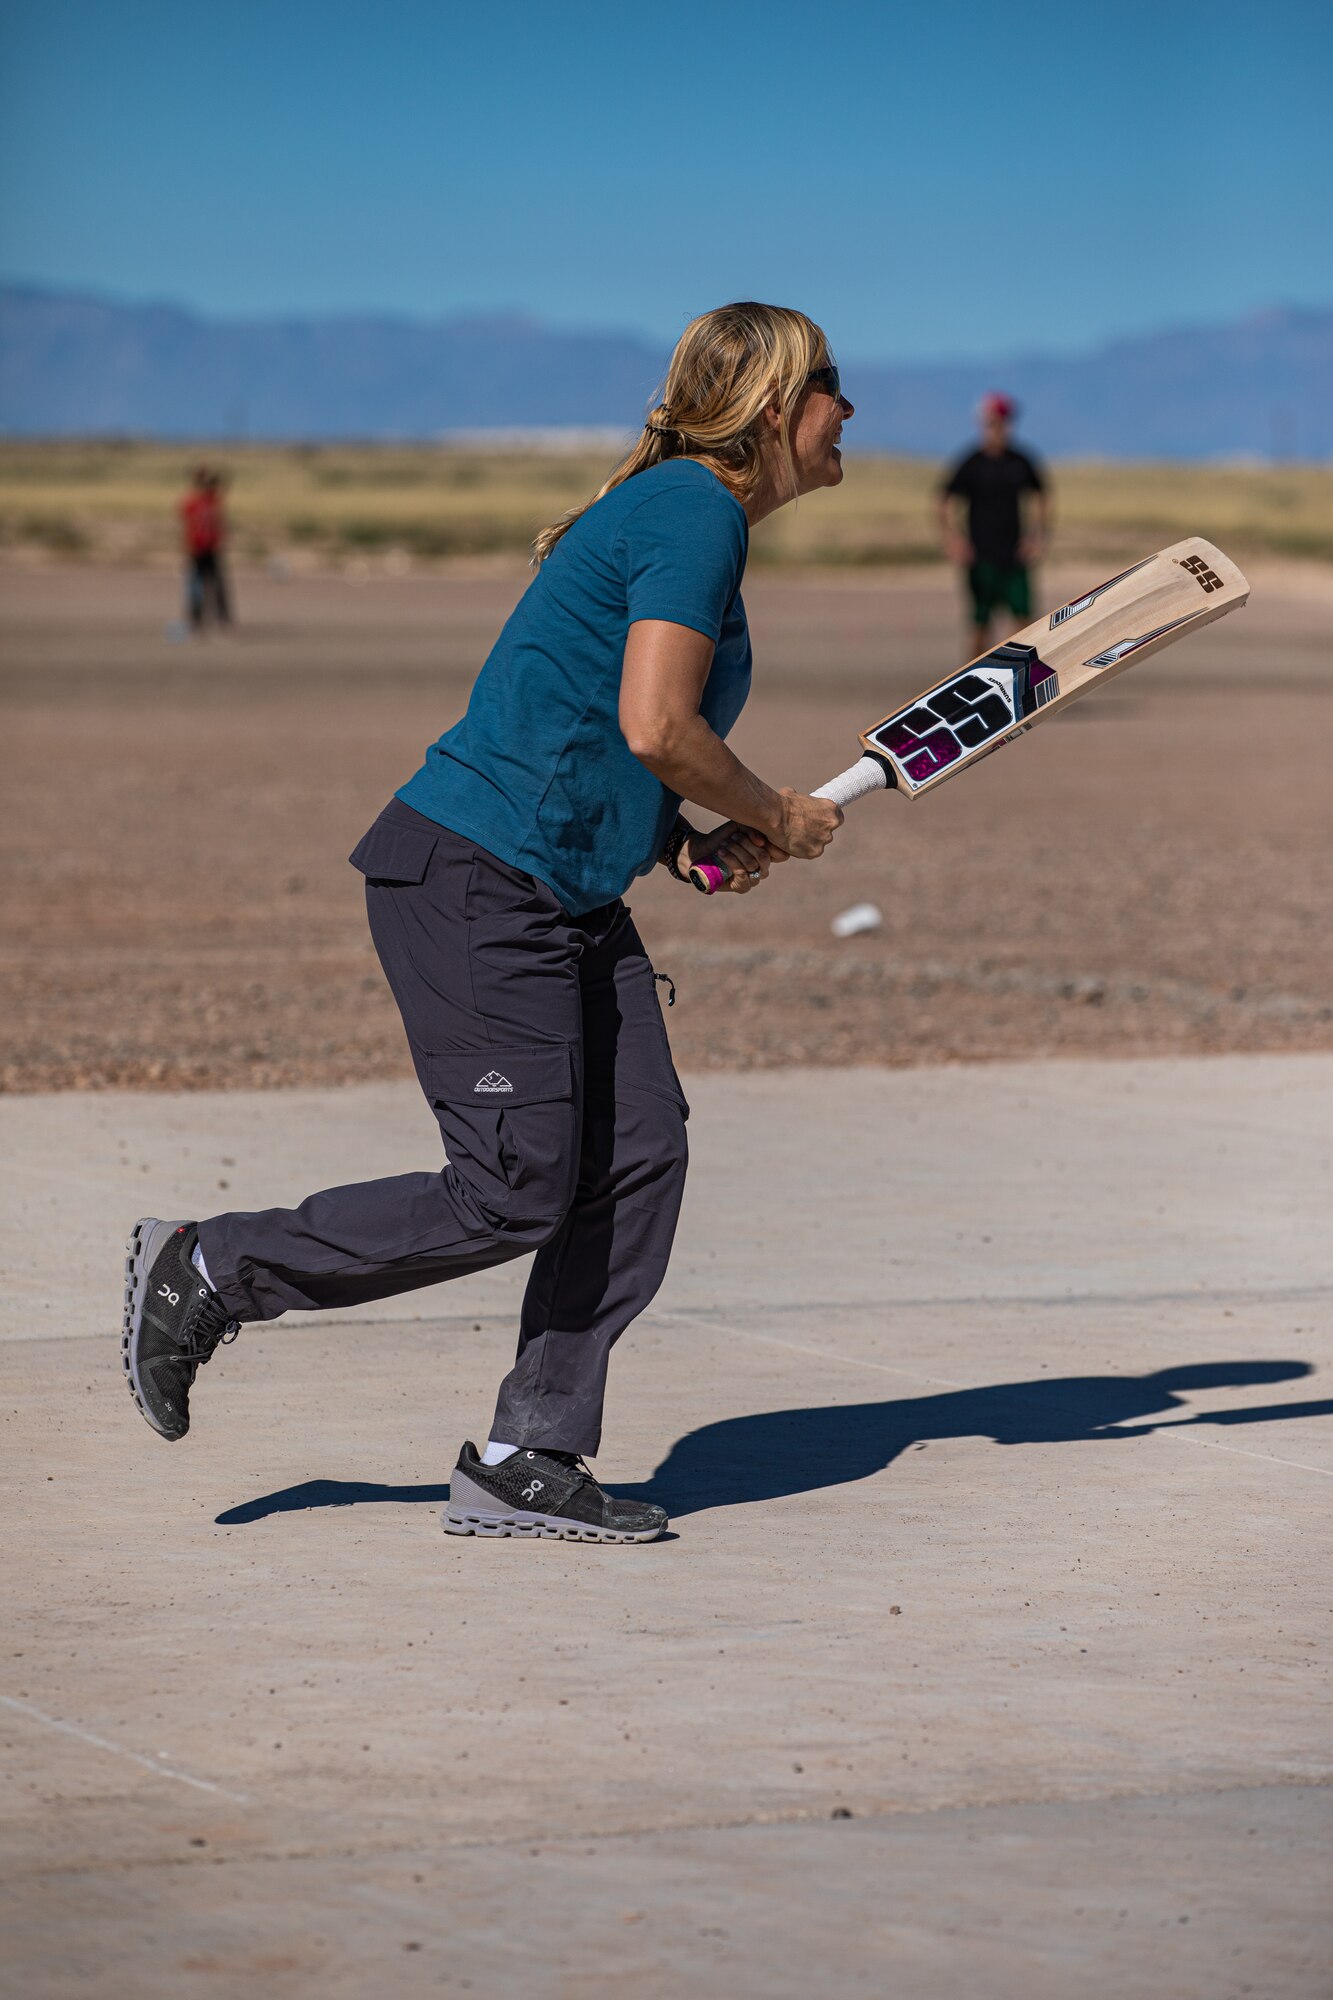 Col. Meredith Seeley, Task Force-Holloman deputy commander deployed from MacDill Air Force Base, Florida, plays during a cricket game between U.S. service members and Afghan evacuees at Aman Omid Village on Holloman Air Force Base, New Mexico, Oct. 9, 2021. The Department of Defense, through U.S. Northern Command, and in support of the Department of Homeland Security, is providing transportation, temporary housing, medical screening, and general support for at least 50,000 Afghan evacuees at suitable facilities, in permanent or temporary structures, as quickly as possible. This initiative provides Afghan personnel essential support at secure locations outside Afghanistan. (U.S. Army photo by Pfc. Anthony Sanchez)